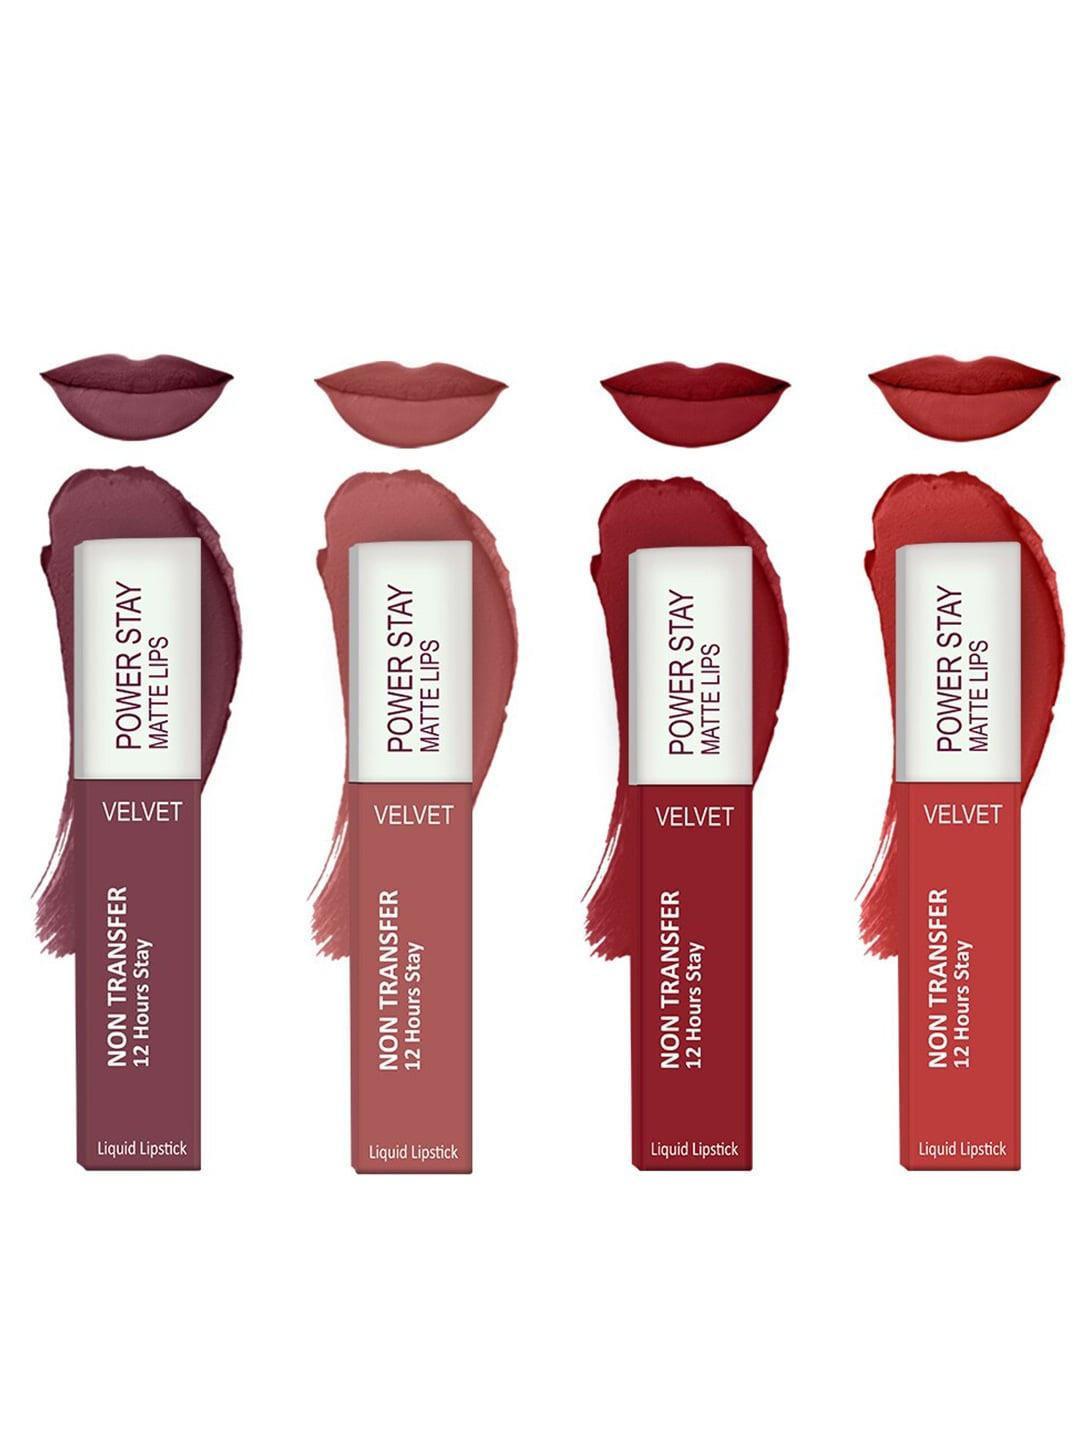 Forsure Set of 4 Power Stay Matte Lips Non-Transfer 12 Hours Stay Velvet Matte Liquid Lipstick - Mauve Matte 23- Peach Nude 21 - Deep Red 22- Bright Red 01